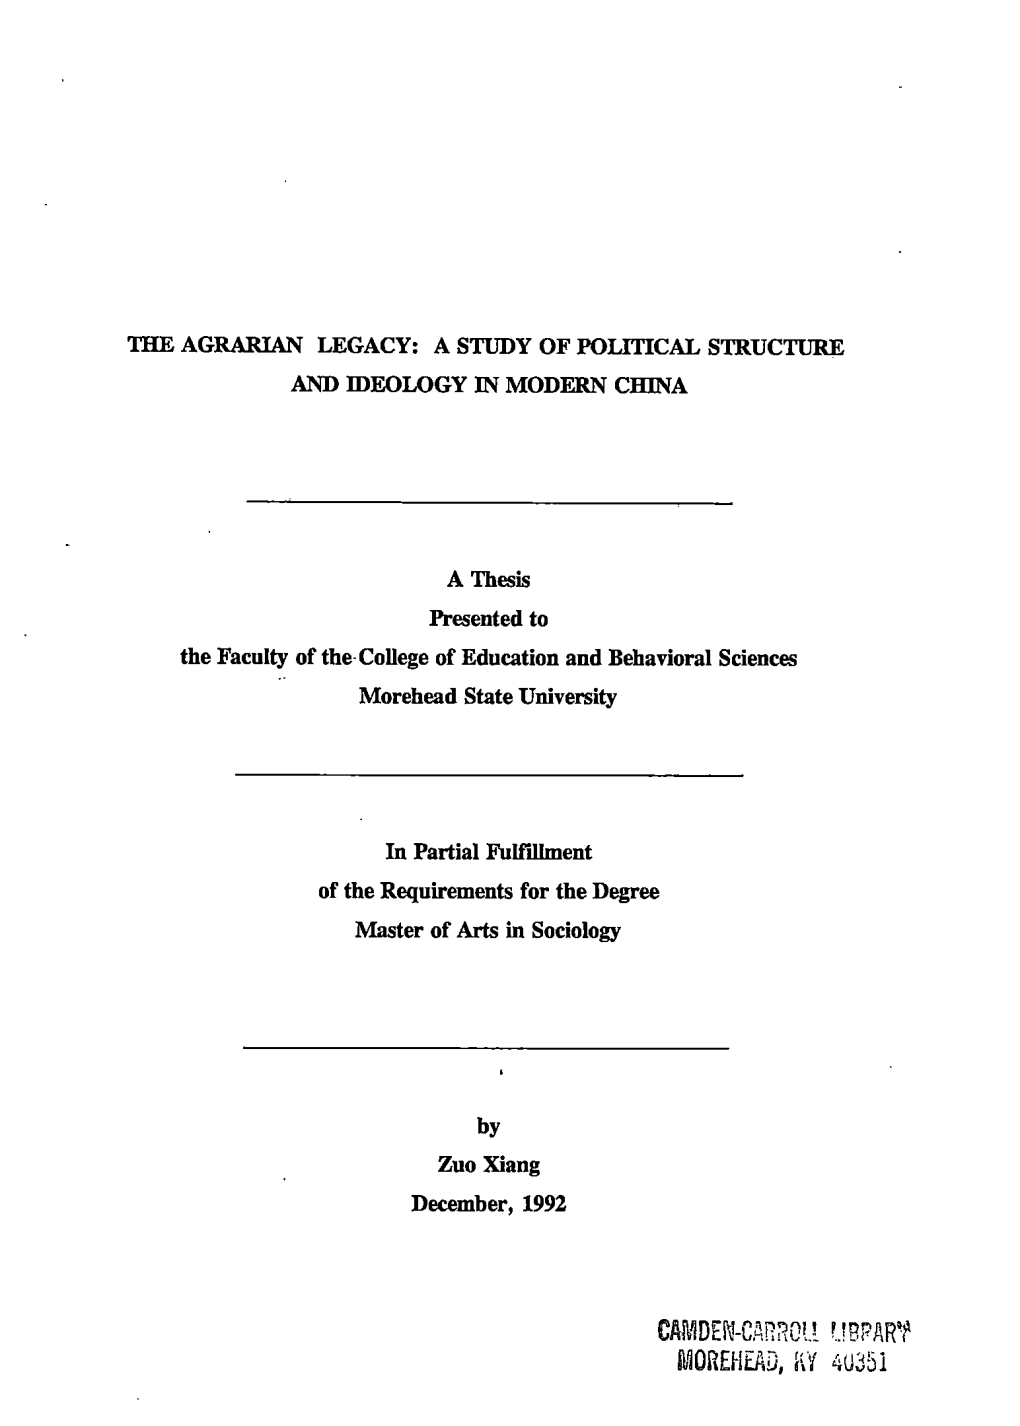 The Agrarian Legacy: a Study of Political Structure and Ideology in Modern China